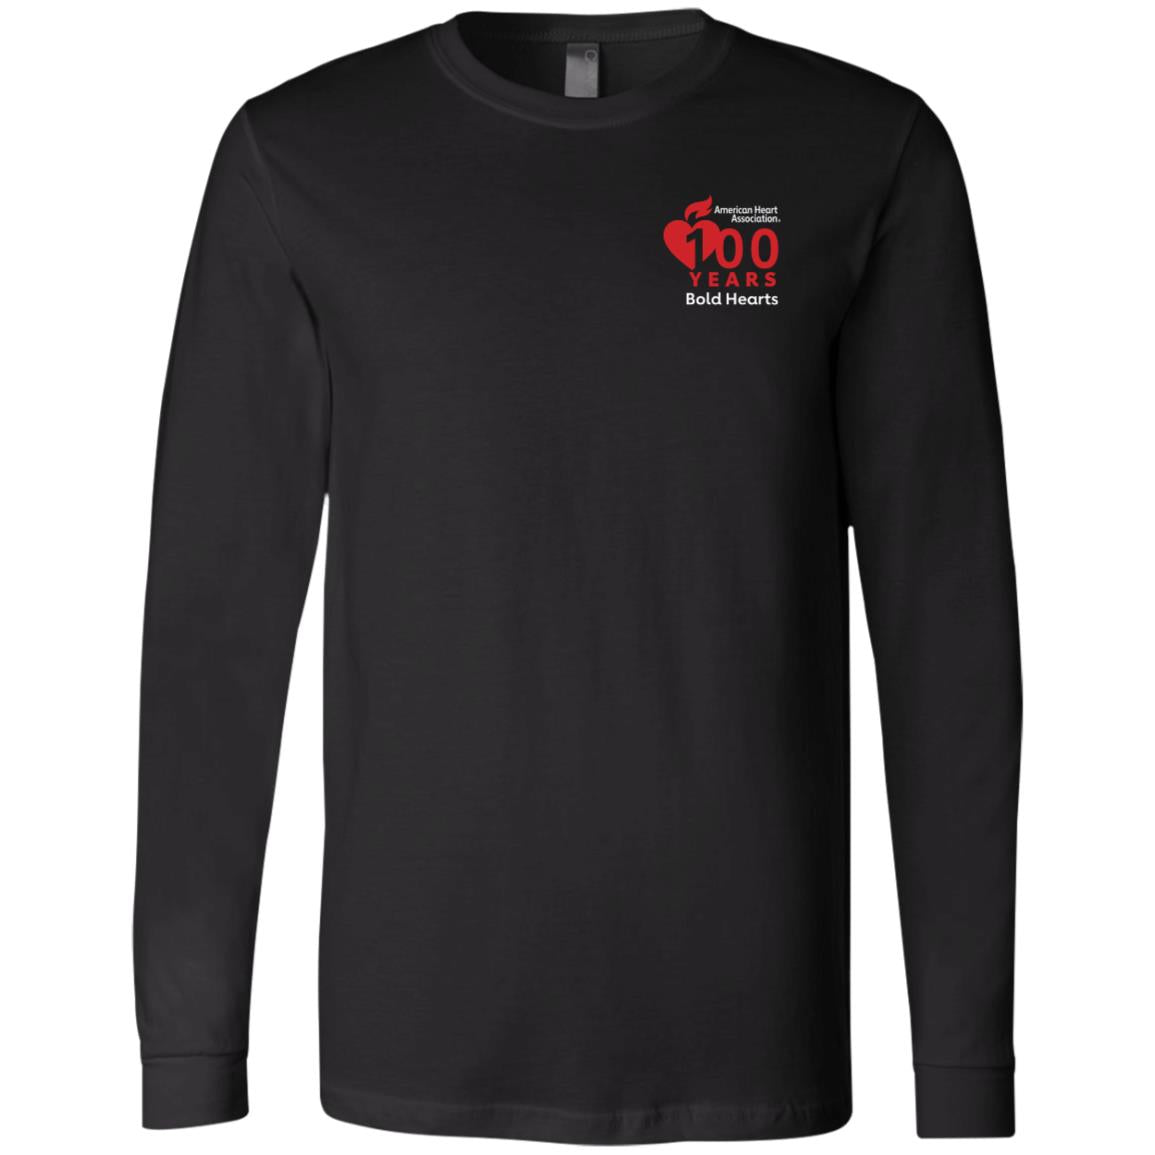 long sleeve tee with AHA Bold Hearts logo on front chest